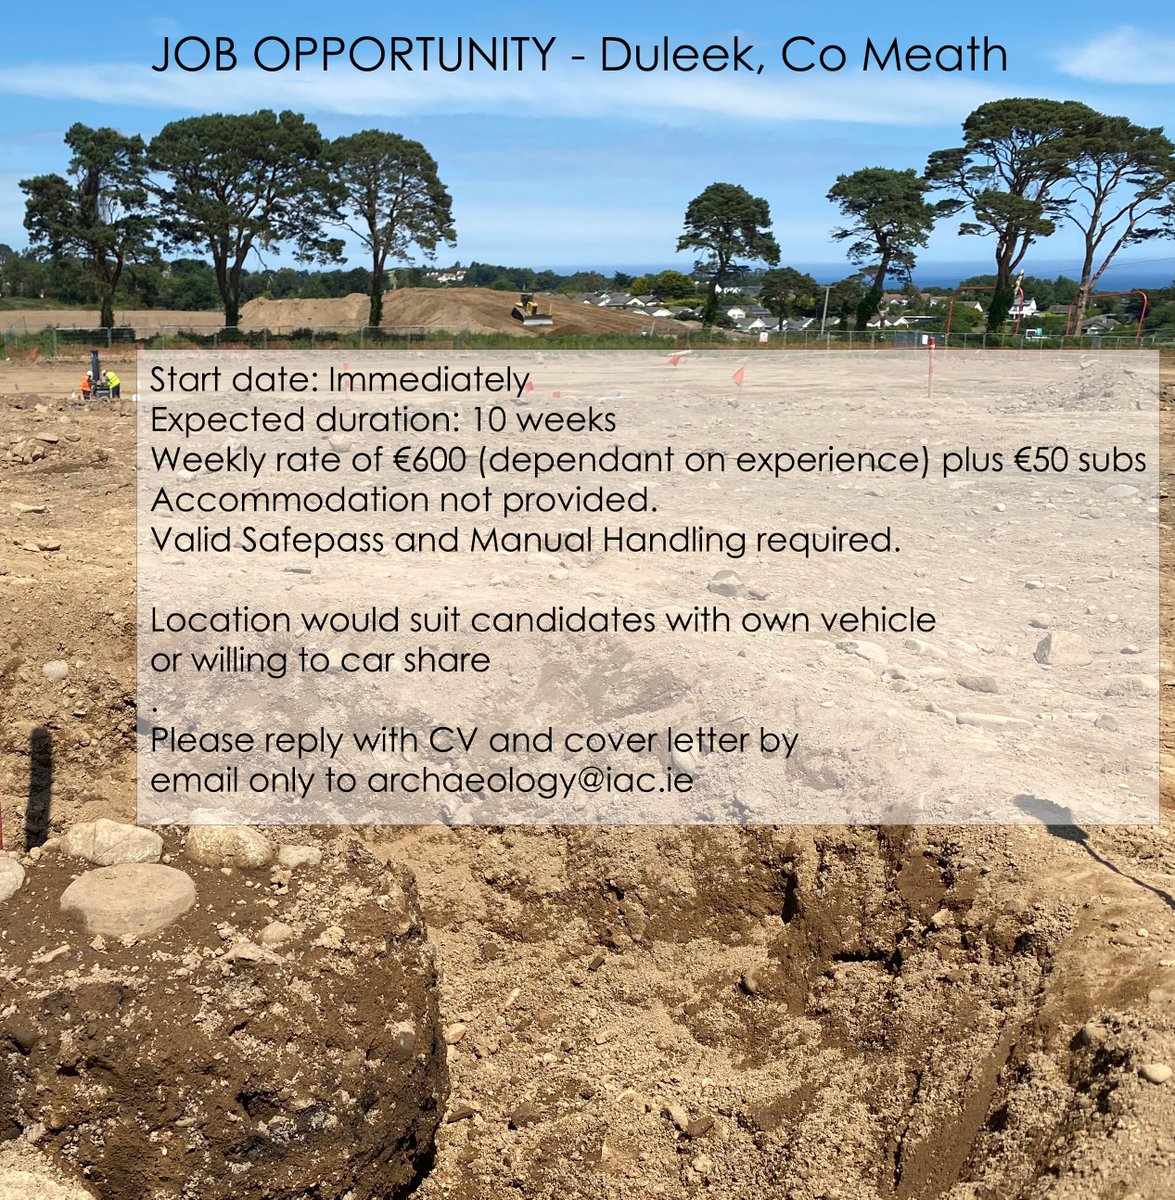 #jobopportunity for all grades of field staff on a range of projects in Leinster area. Project in #Duleek starting this week. Please email CV to archaeology@iac.ie if interested. Thanks. 
#IACexcavation #archaeologyjobs #archaeologyjobsinireland #archaeologicalexcavation